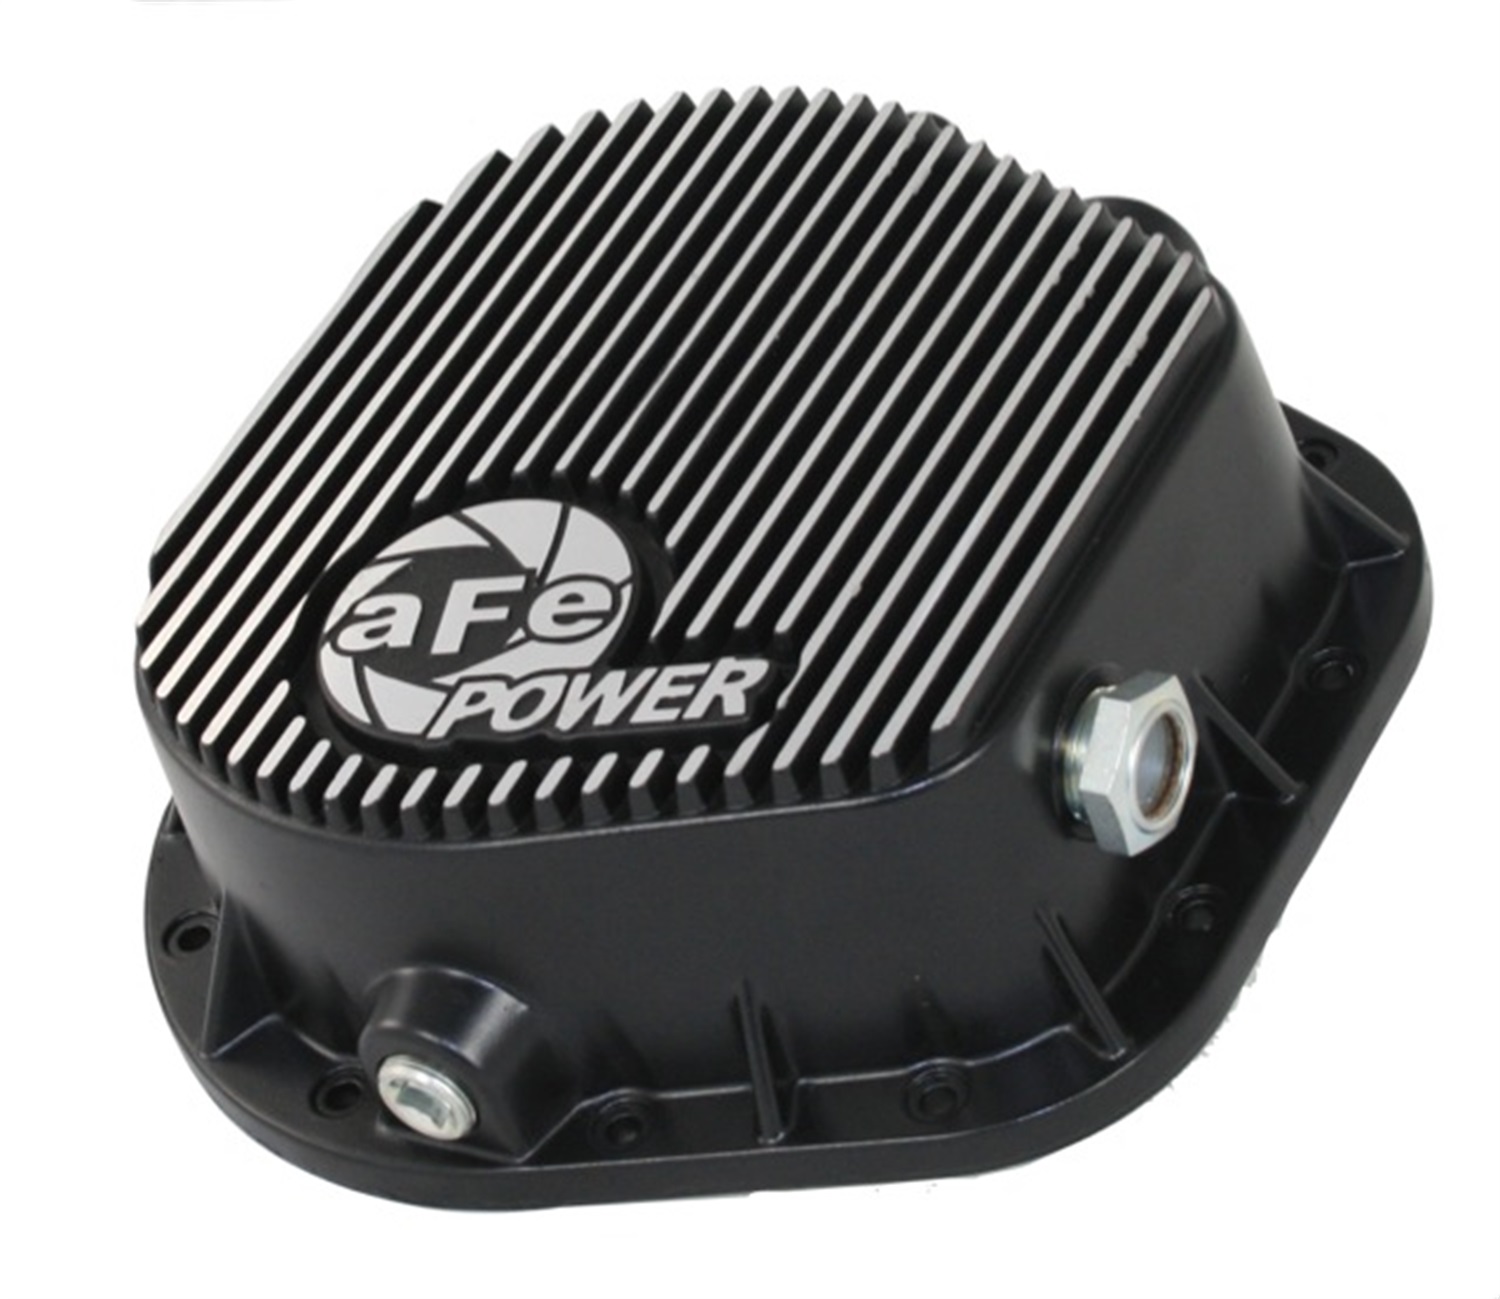 aFe Power aFe Power 46-70022 Differential Cover